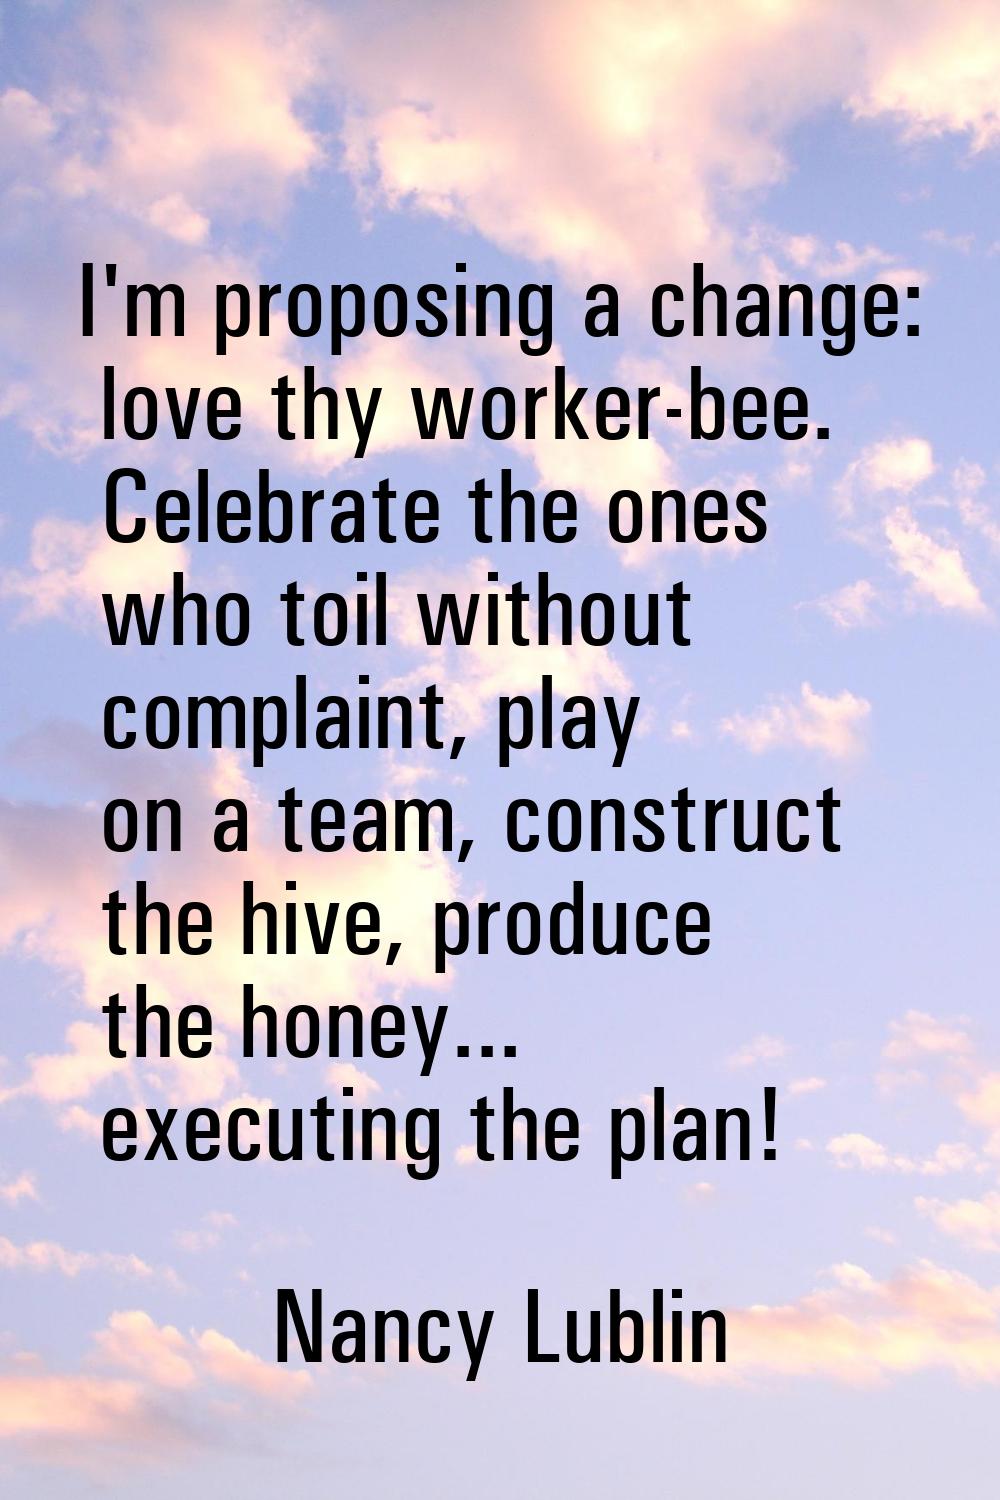 I'm proposing a change: love thy worker-bee. Celebrate the ones who toil without complaint, play on